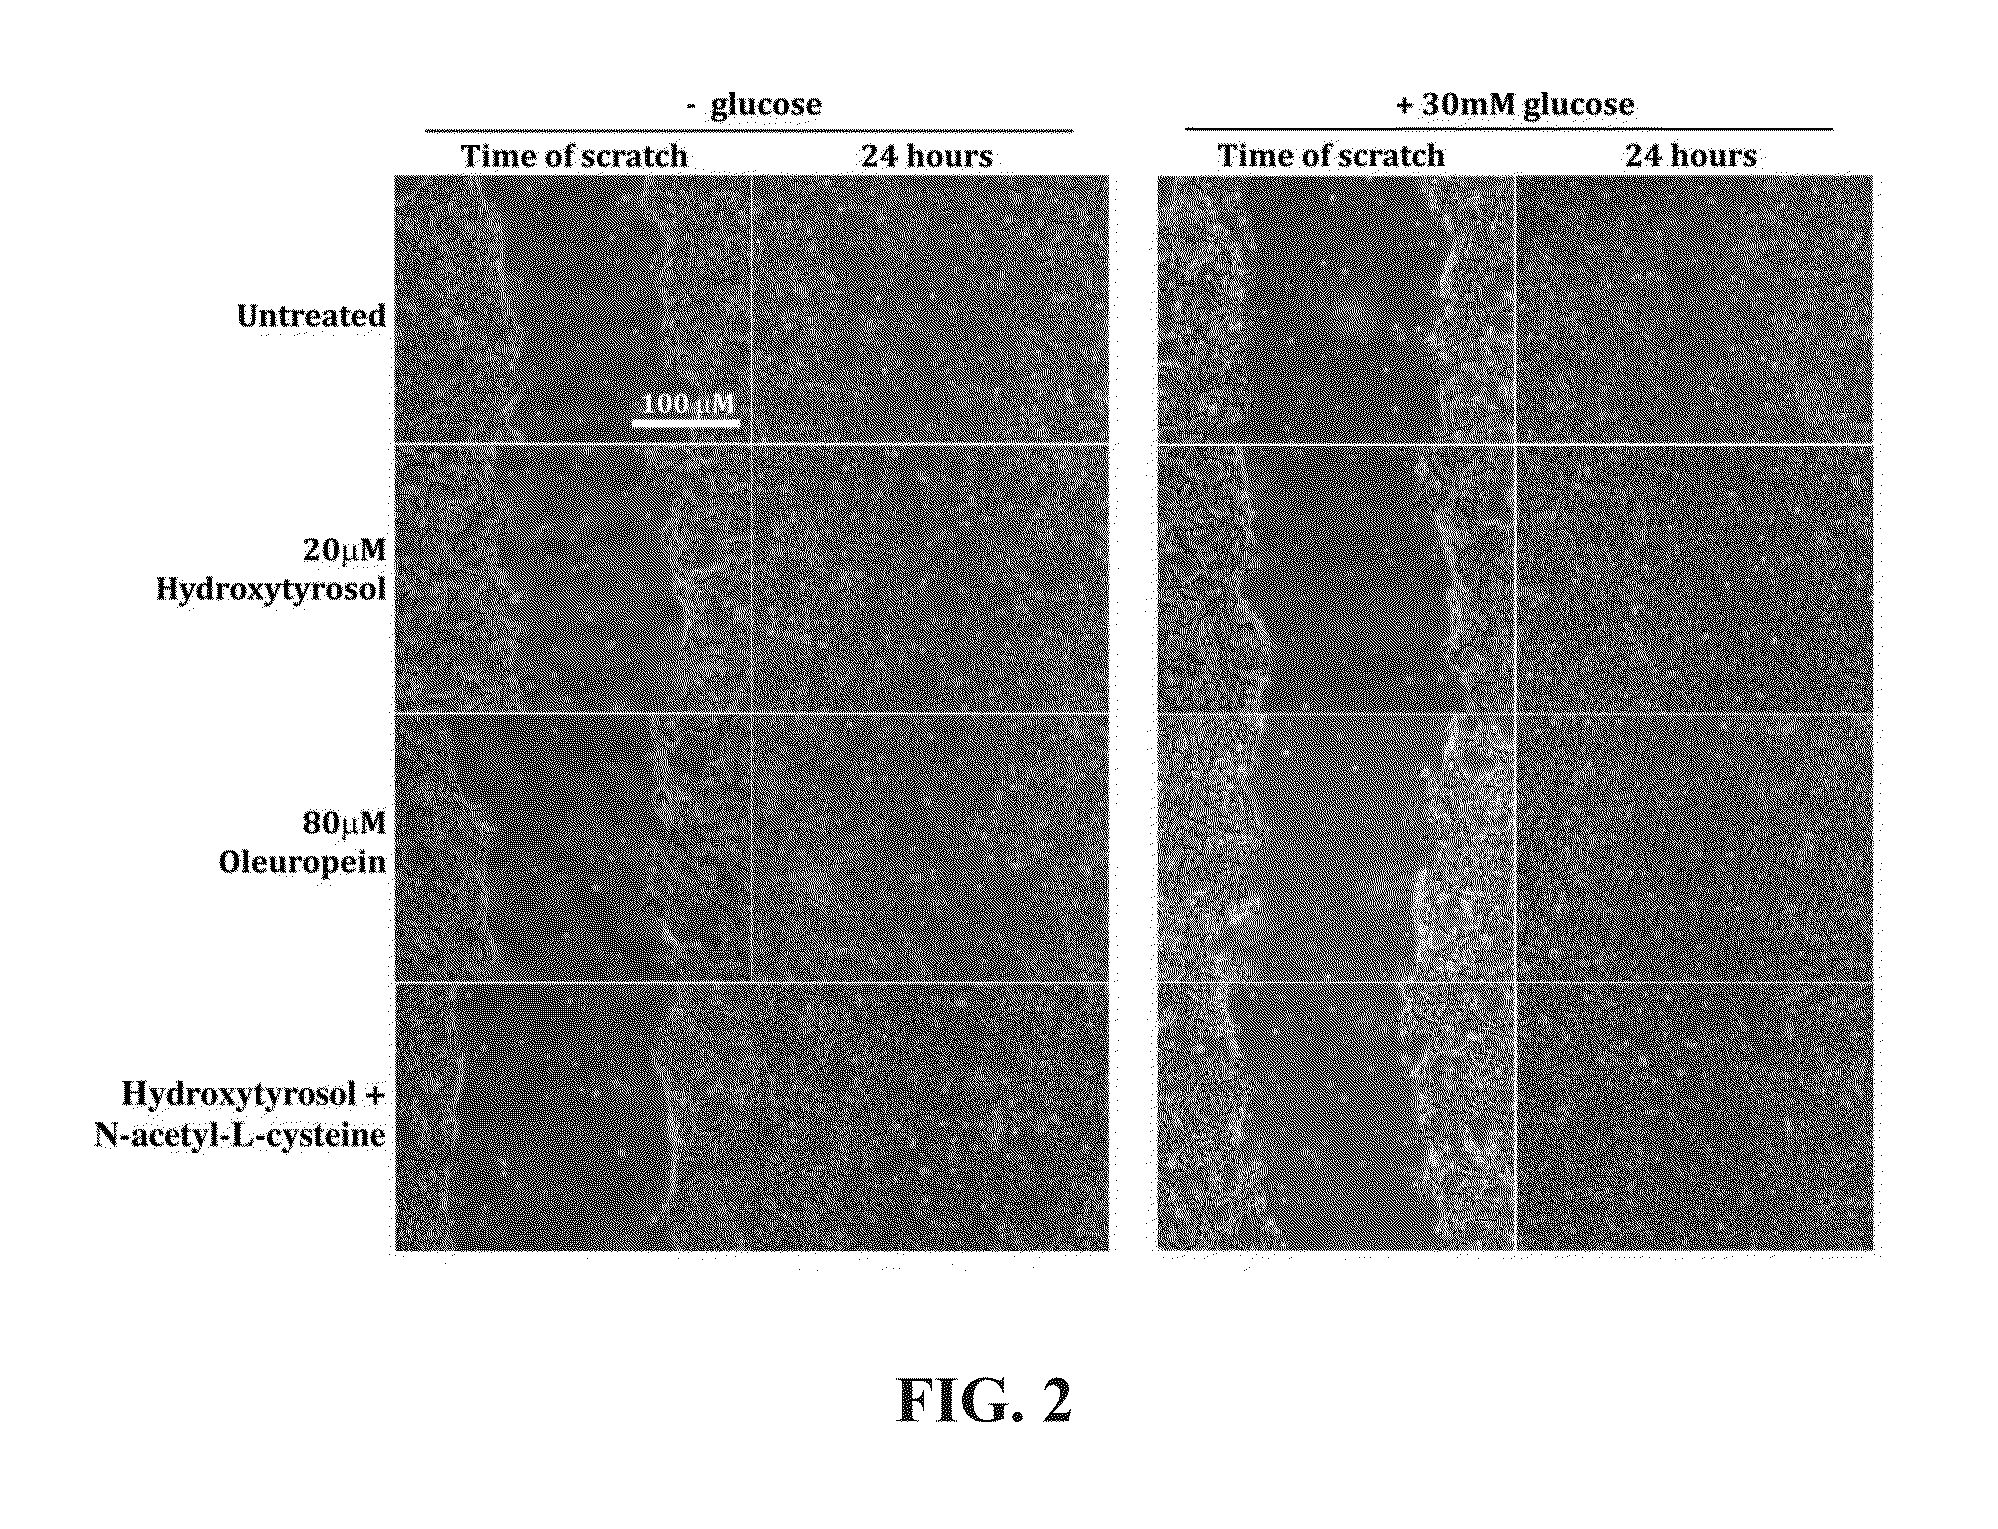 Methods for improved wound closure employing olivamine and human umbilical vein endothelial cells